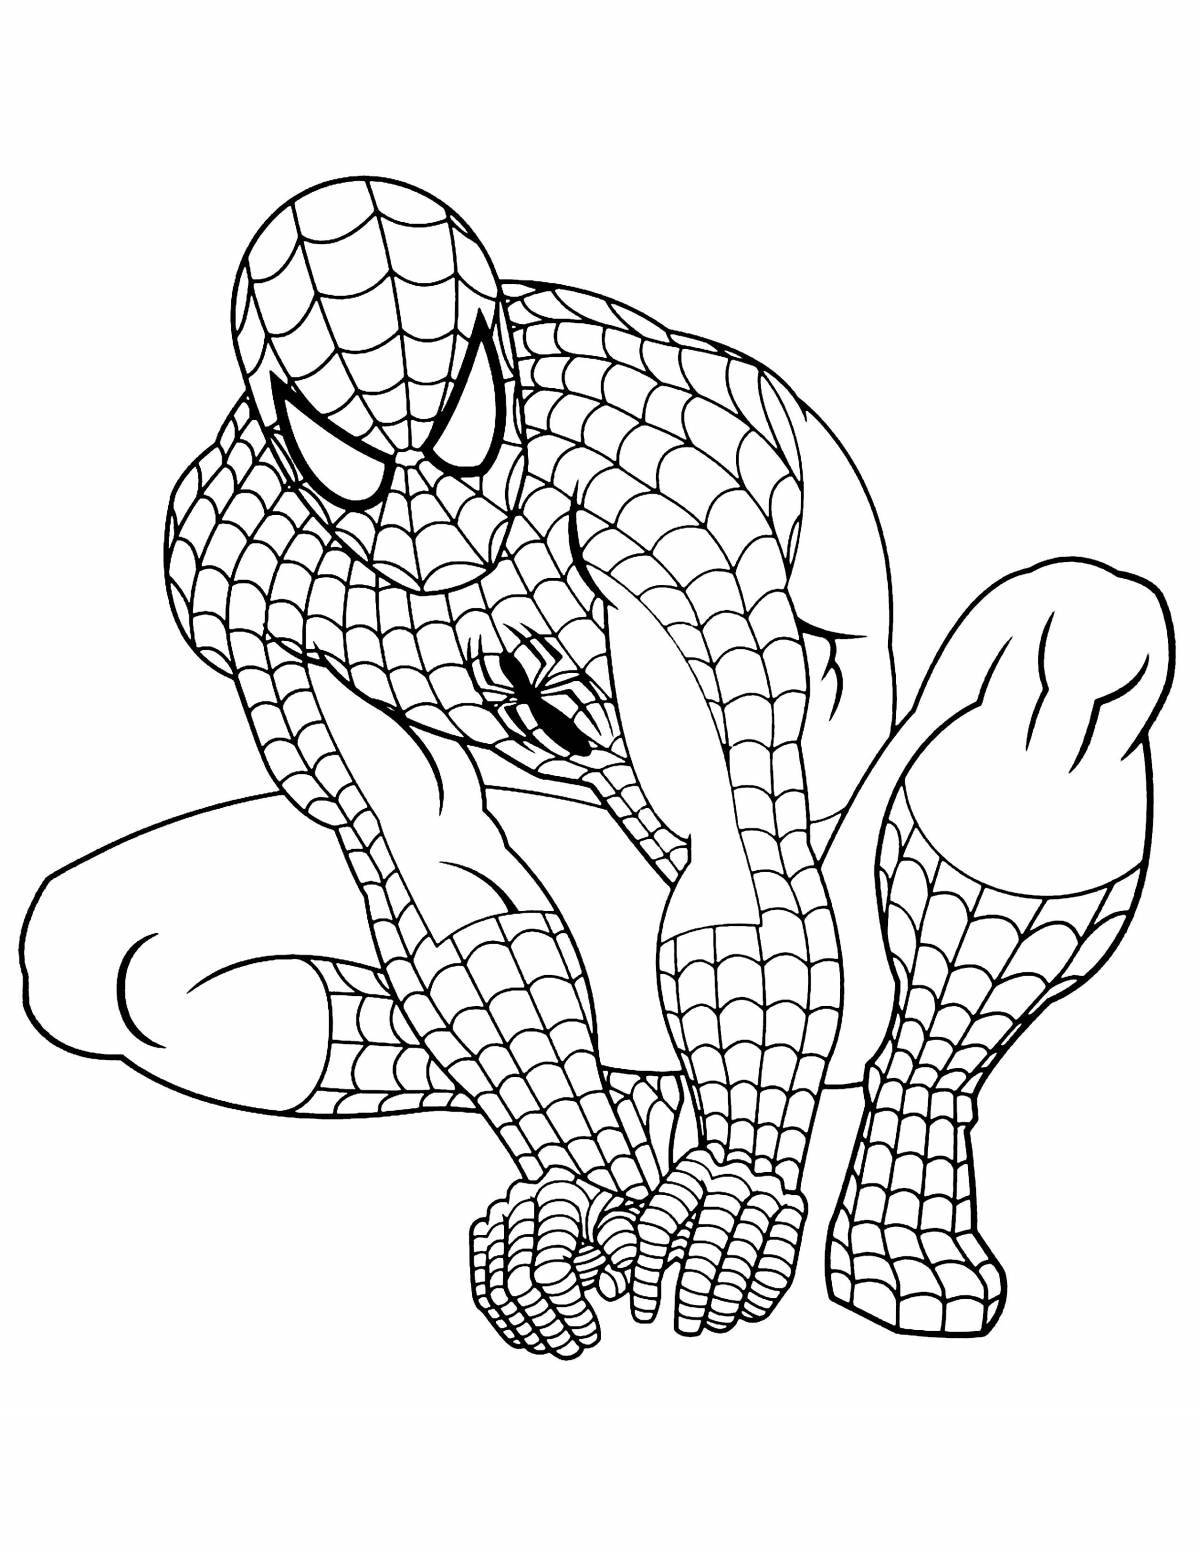 Spiderman's intriguing coloring book